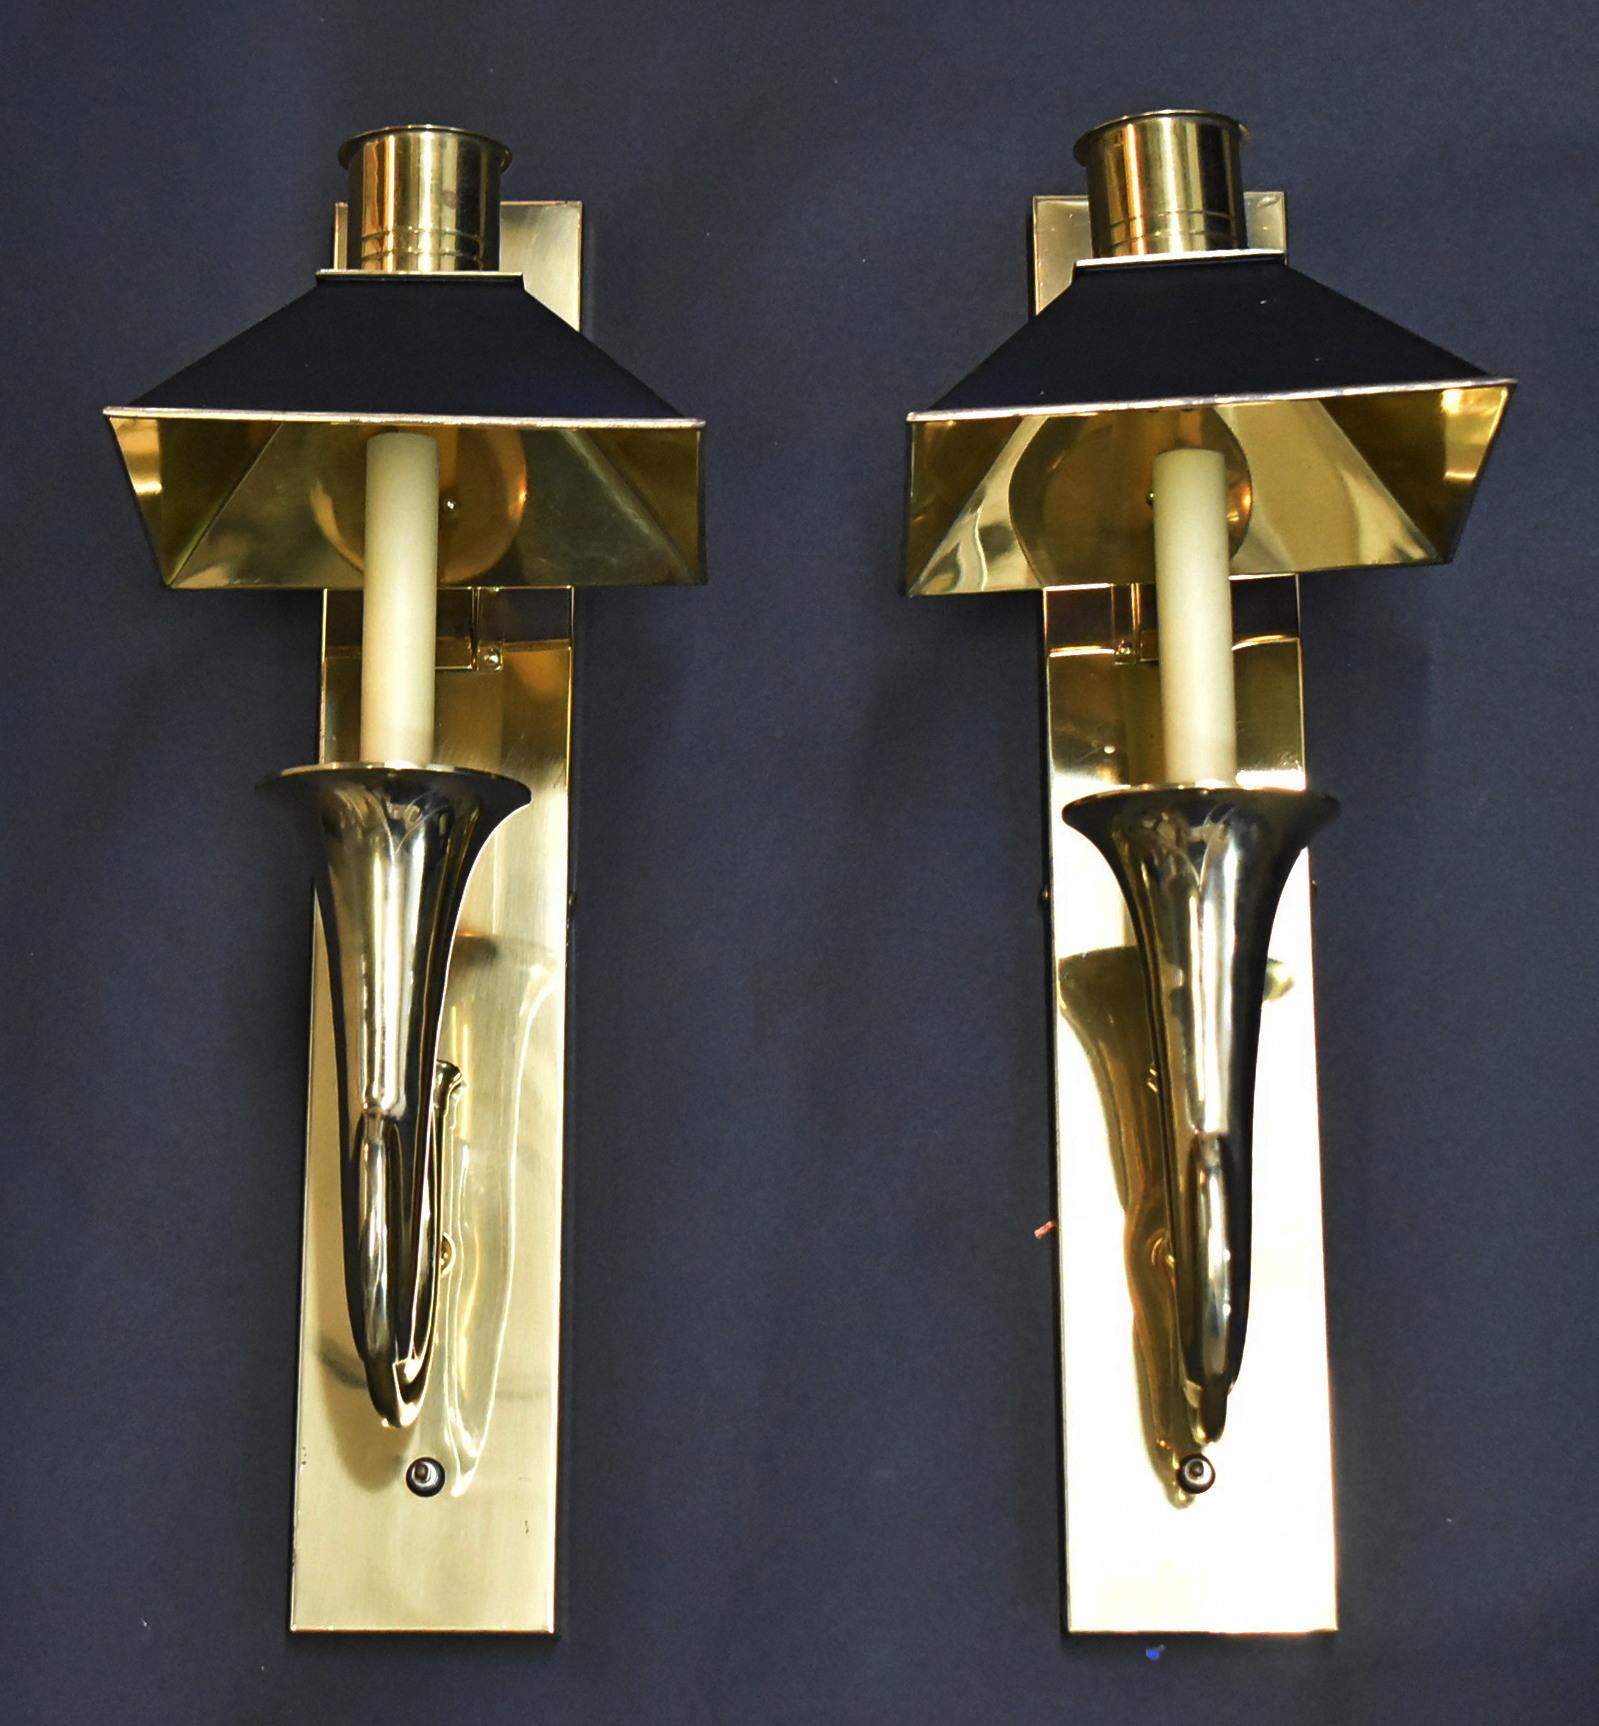 Pair of brass horn wall sconces with black chimney details. Dimensions: 3.5